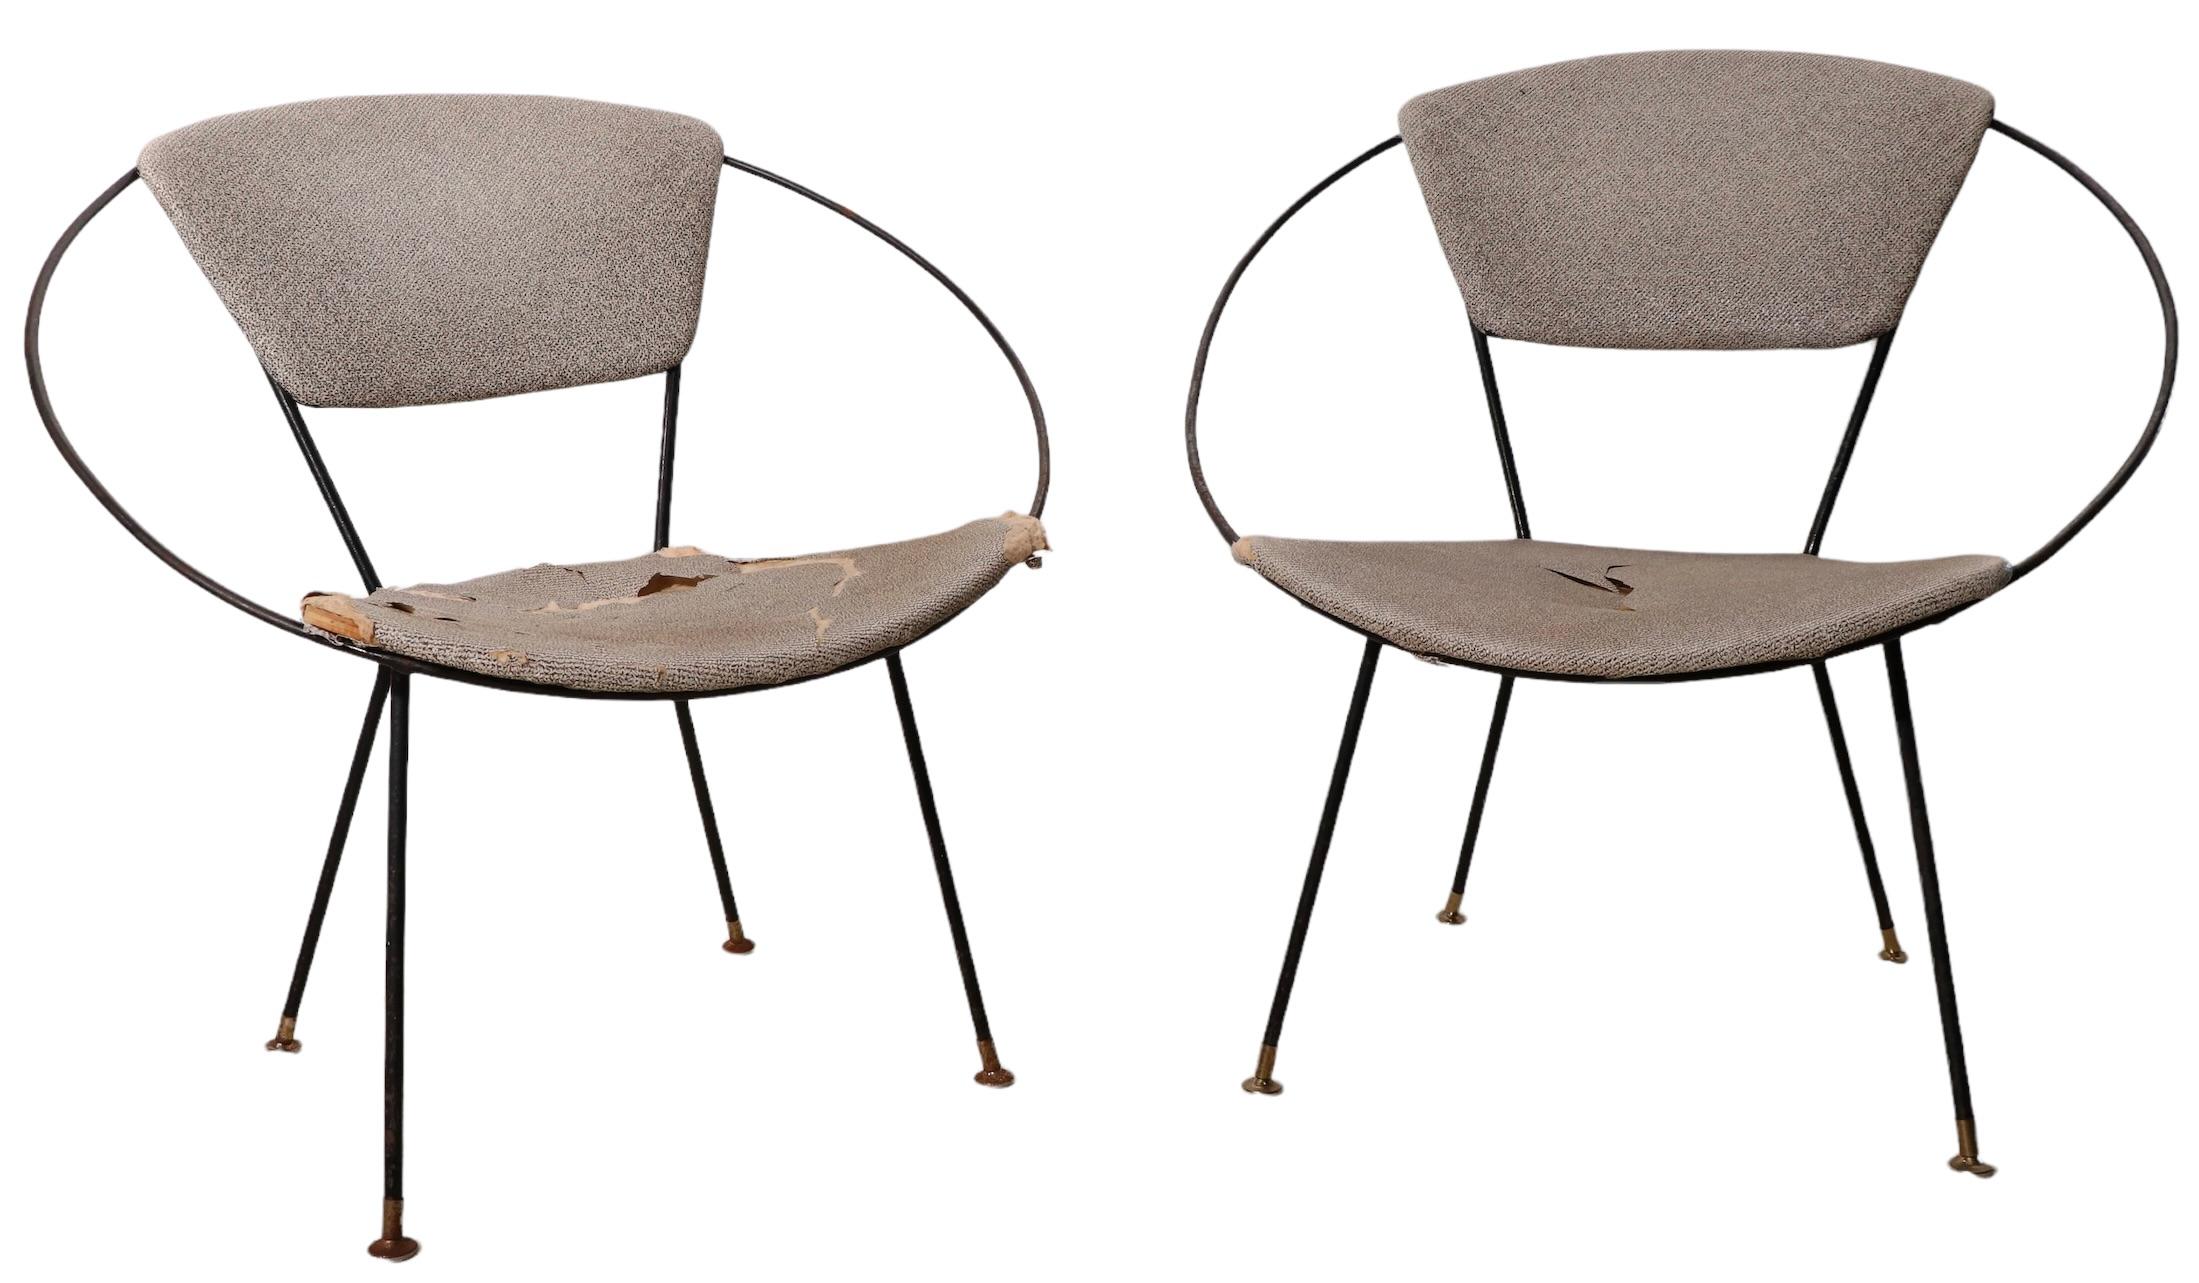 20th Century Pr. Wrought Iron Mid Century Hoop Chairs by John Cicchelli for Riley Wolff 1950s For Sale